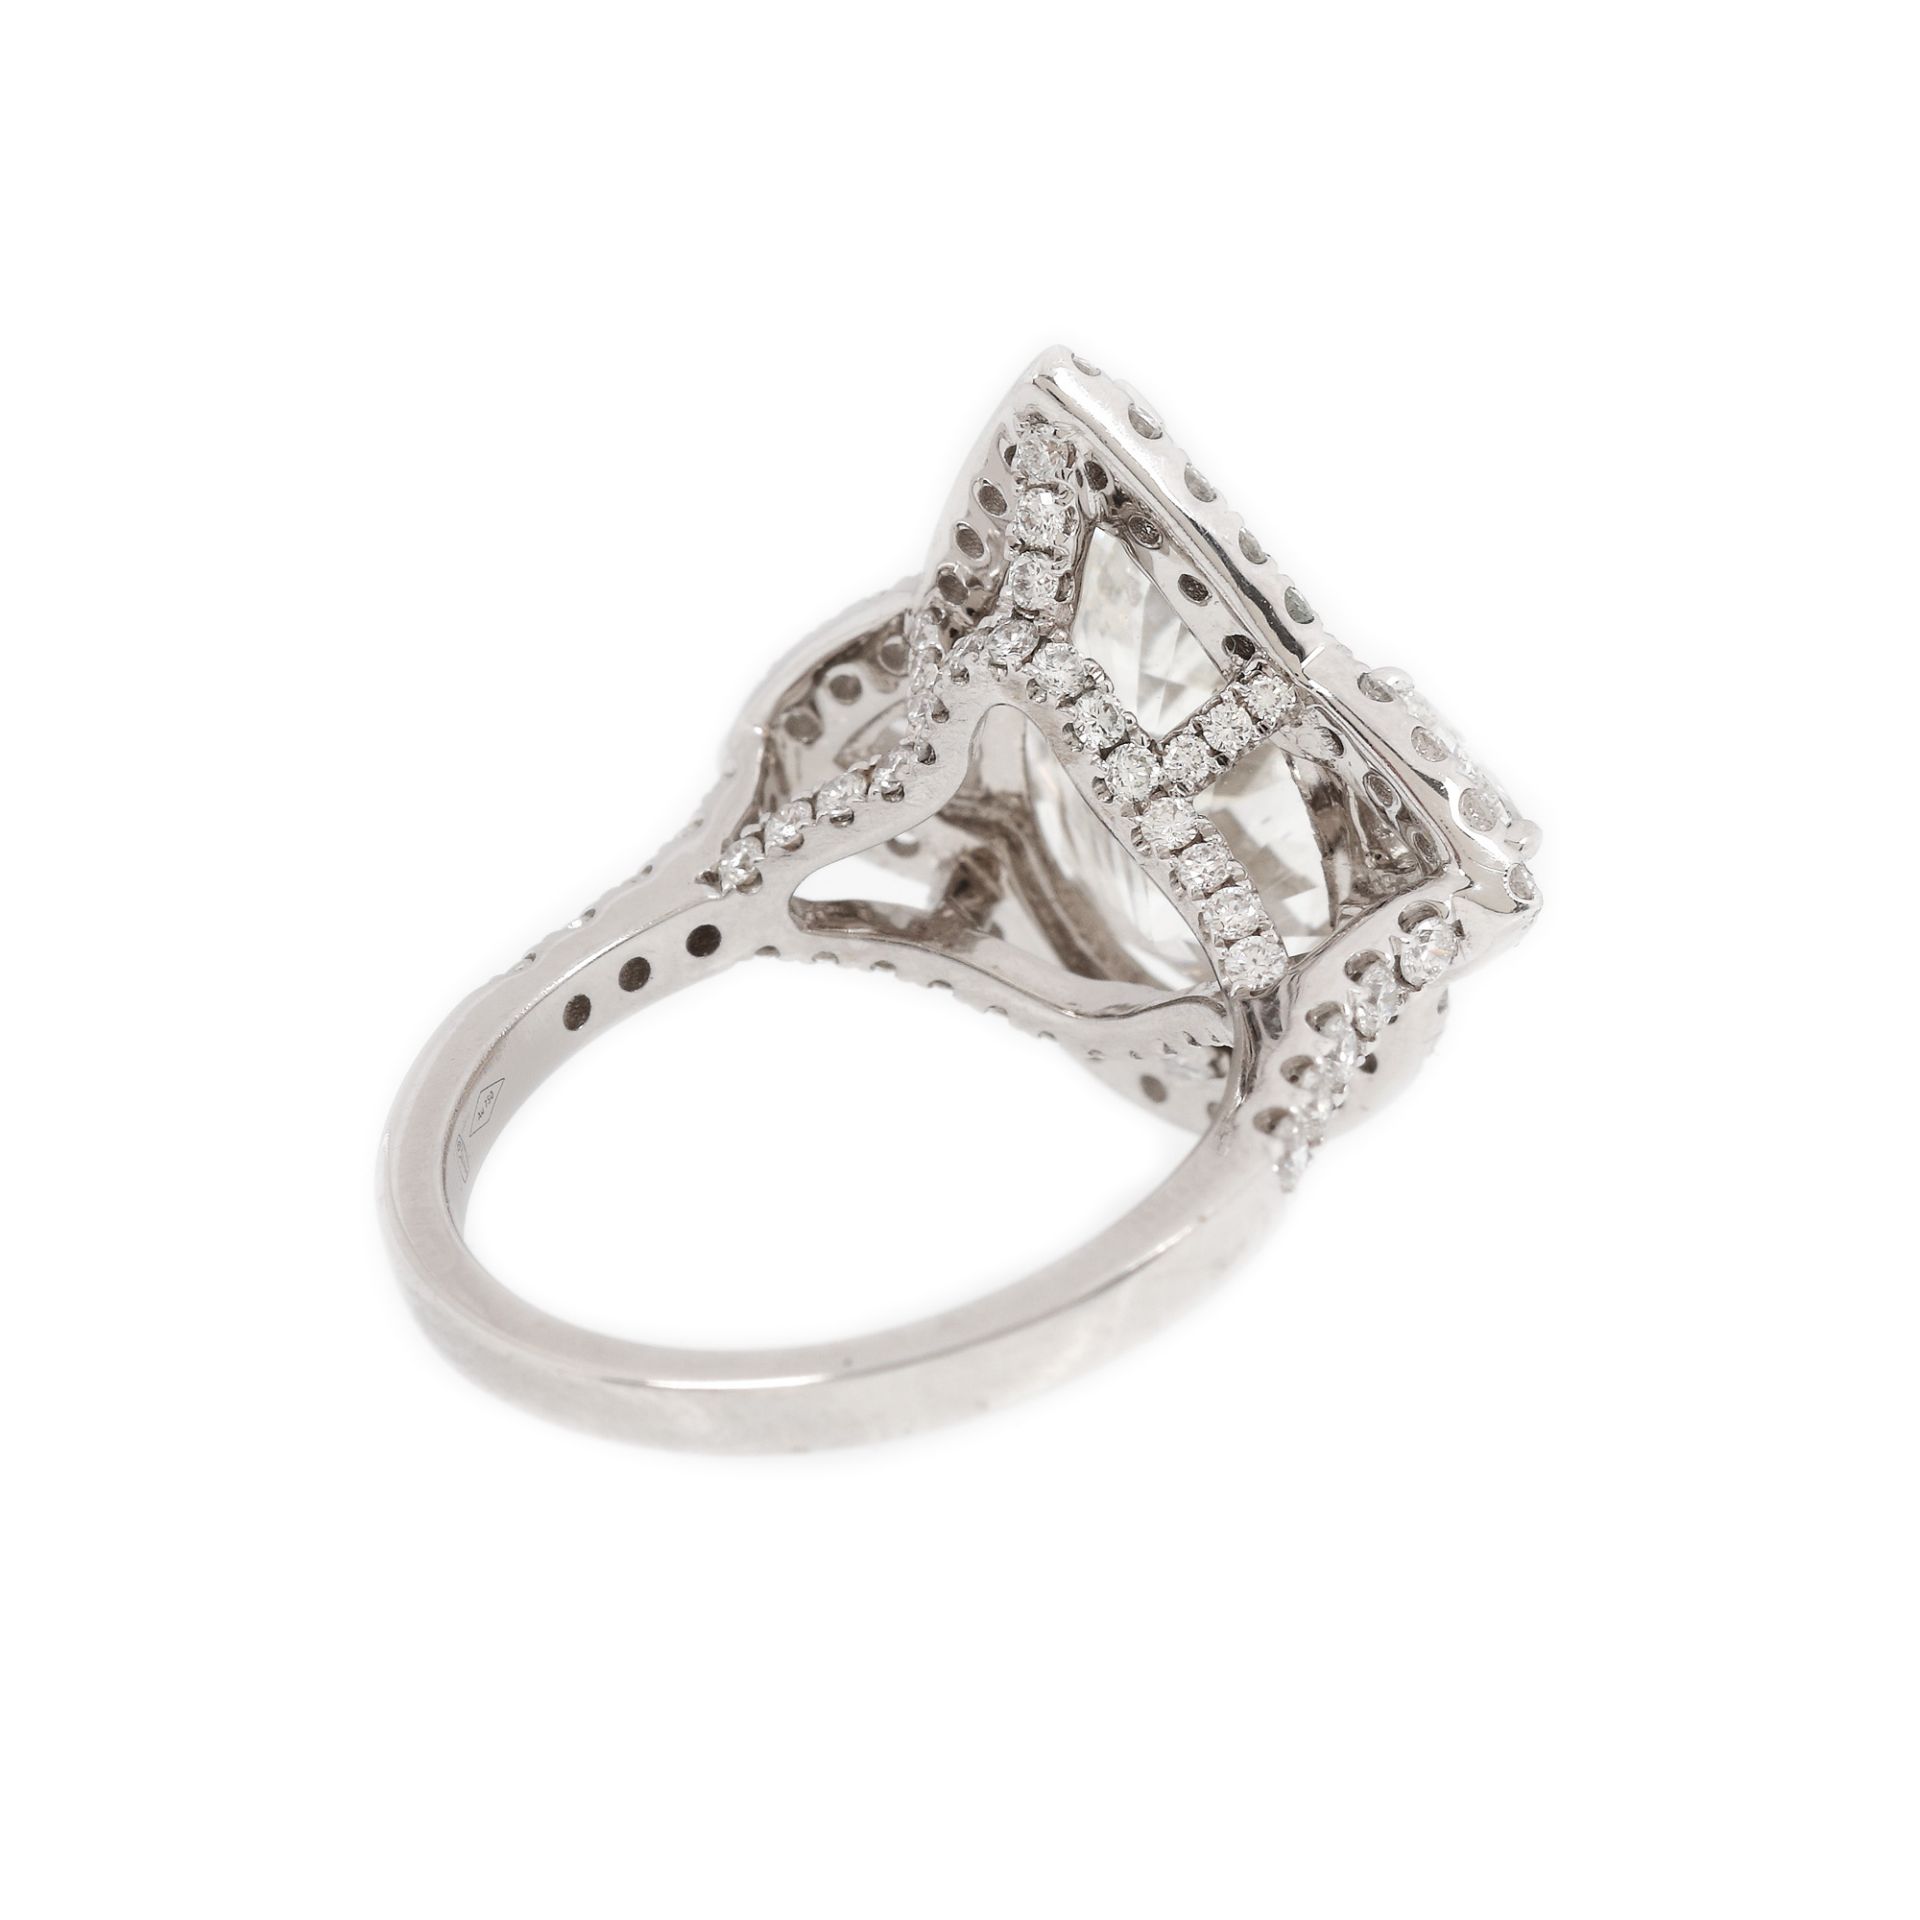 White gold ring, central pear shaped diamond, surrounded by trillion cut and brilliant diamonds - Image 3 of 4